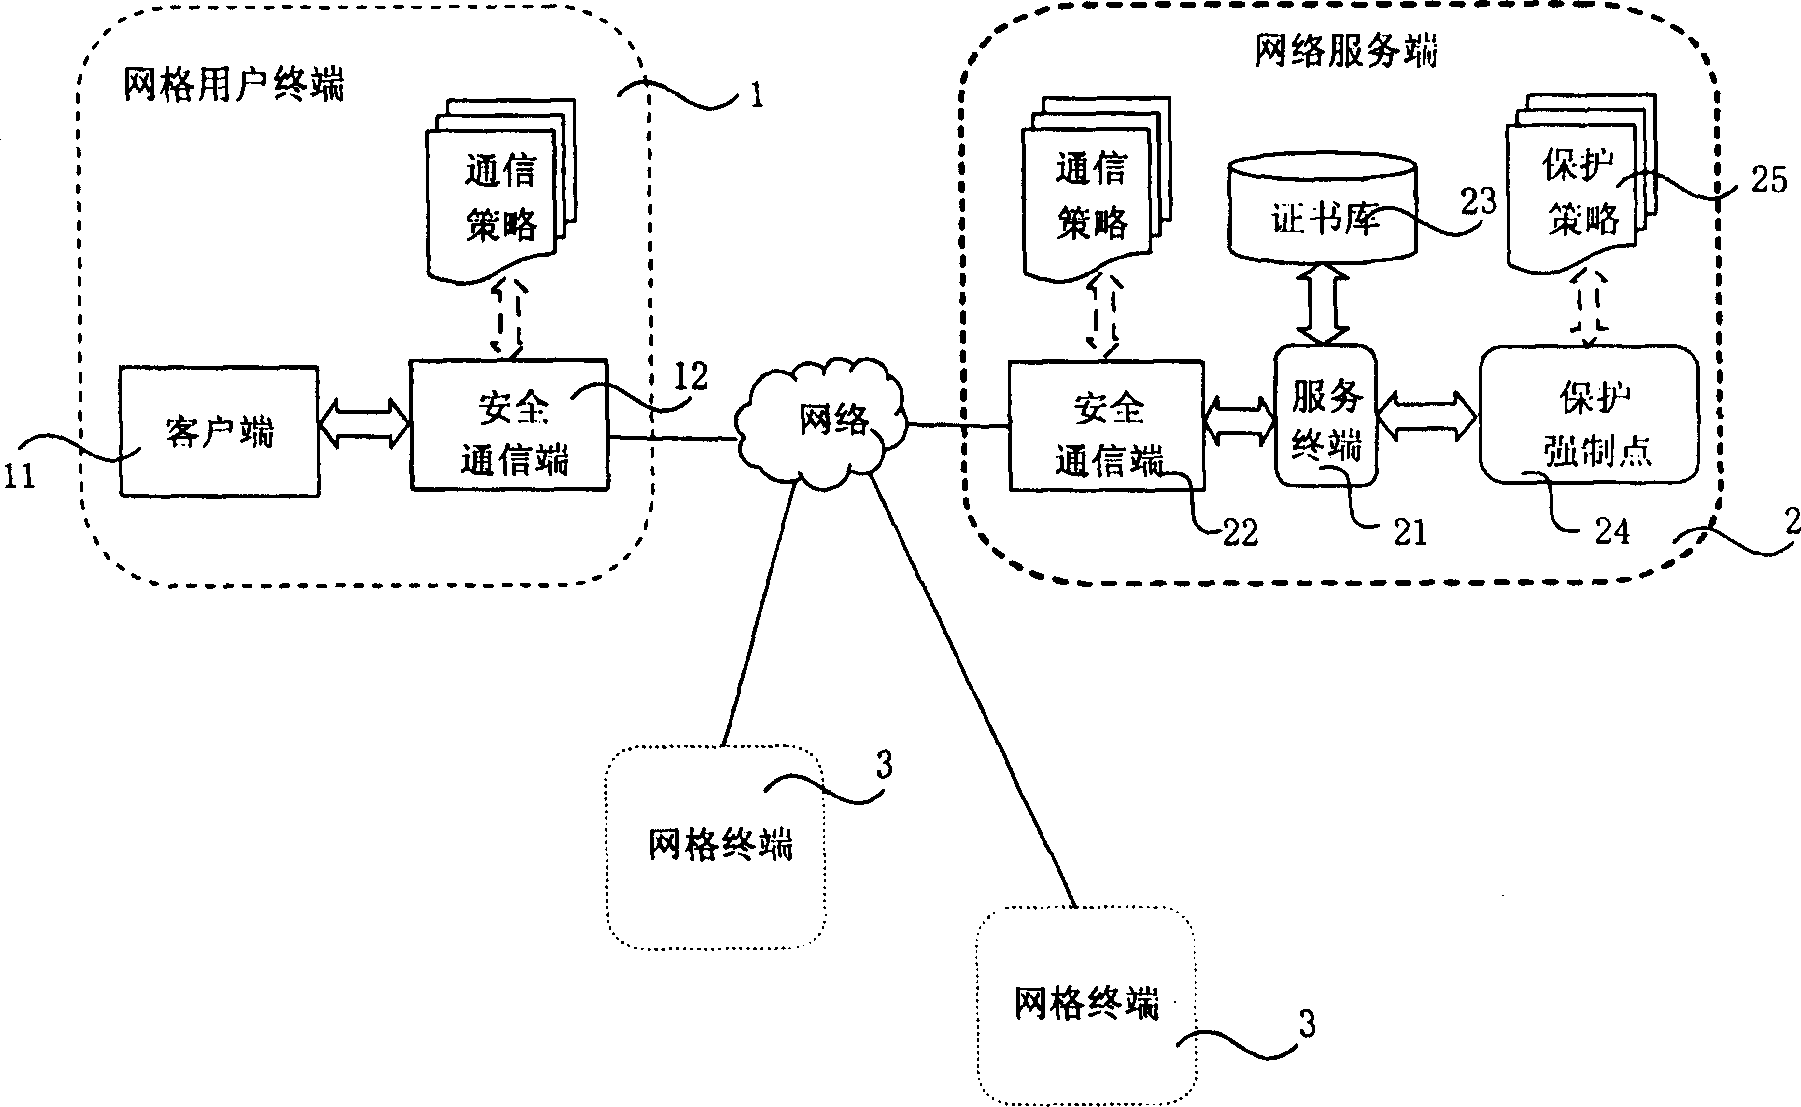 Credential protection handling method facing service